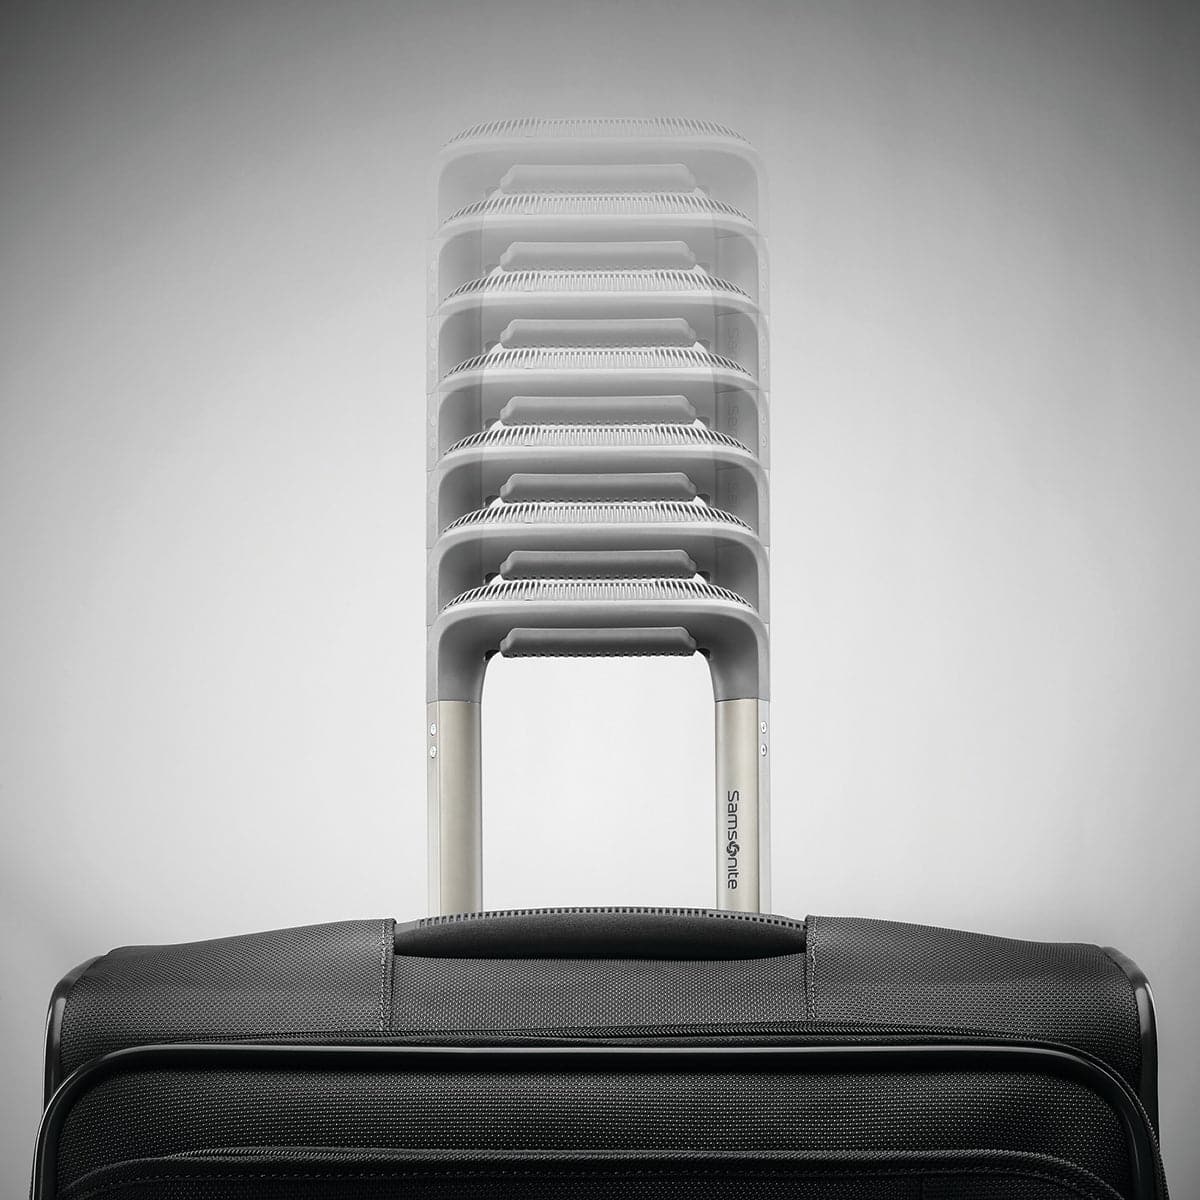 Samsonite Insignis Softside Expandable 29" Spinner Carry-On Luggage